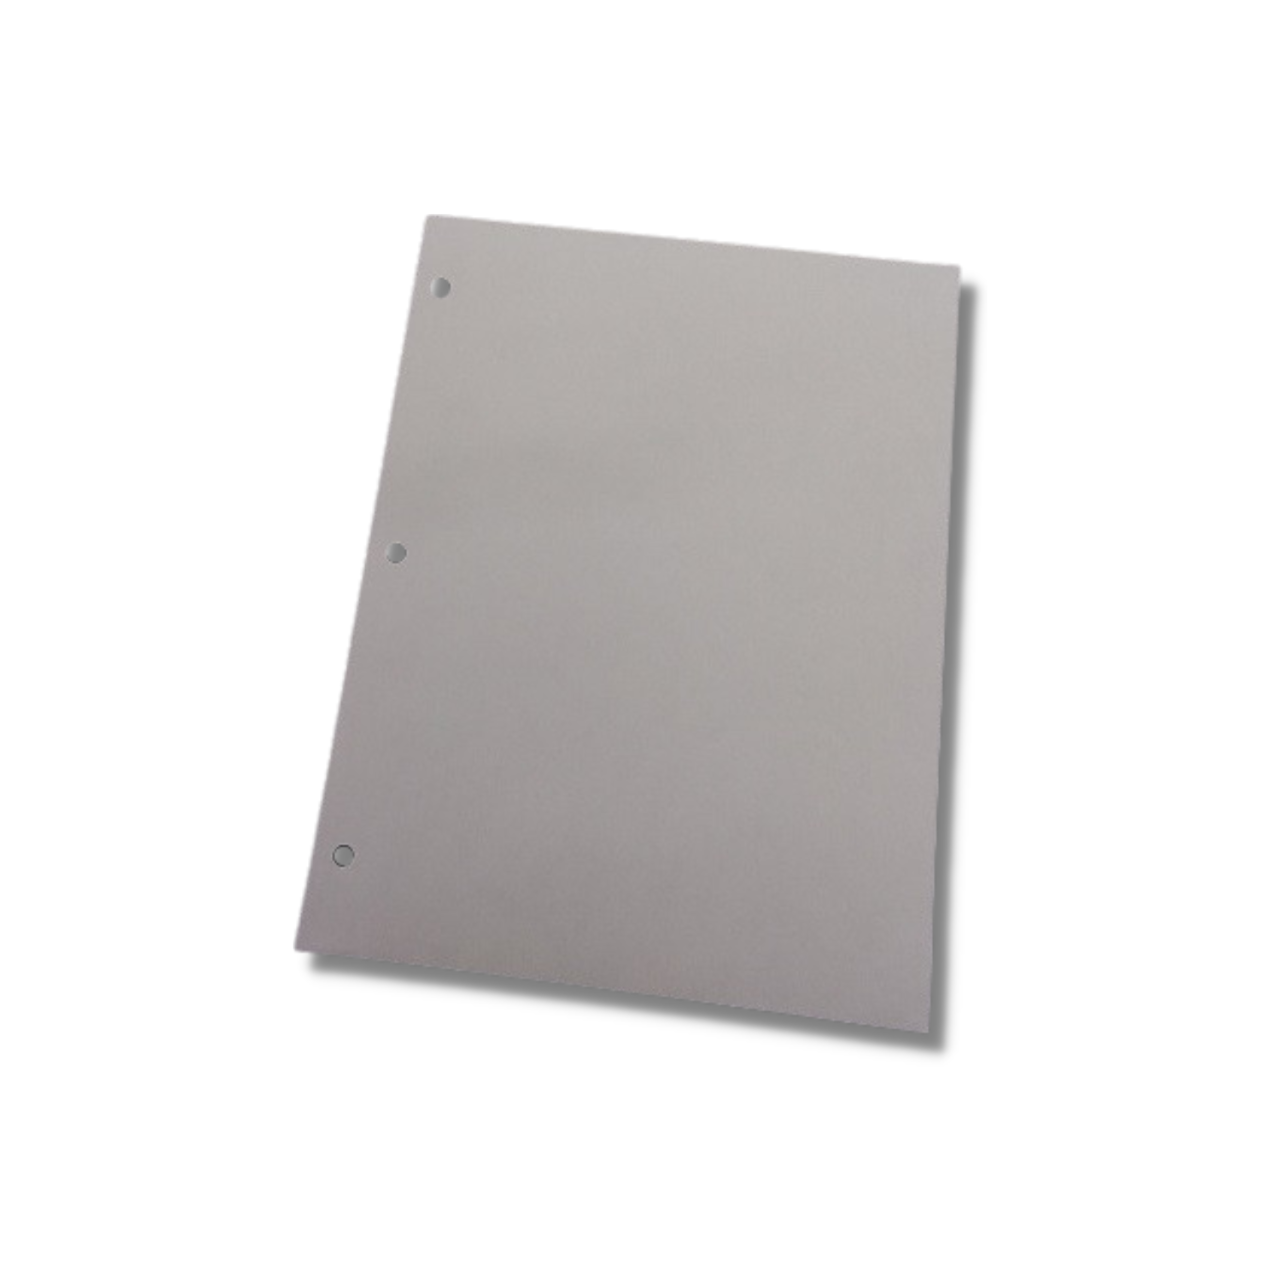 Cleanroom Paper; 3 Hole Punched, 8.5x11, Green, Autoclavable, 22.5#, 250  Sheets/Pack - 10 Packs/Case, LT-7177GN-8A-03